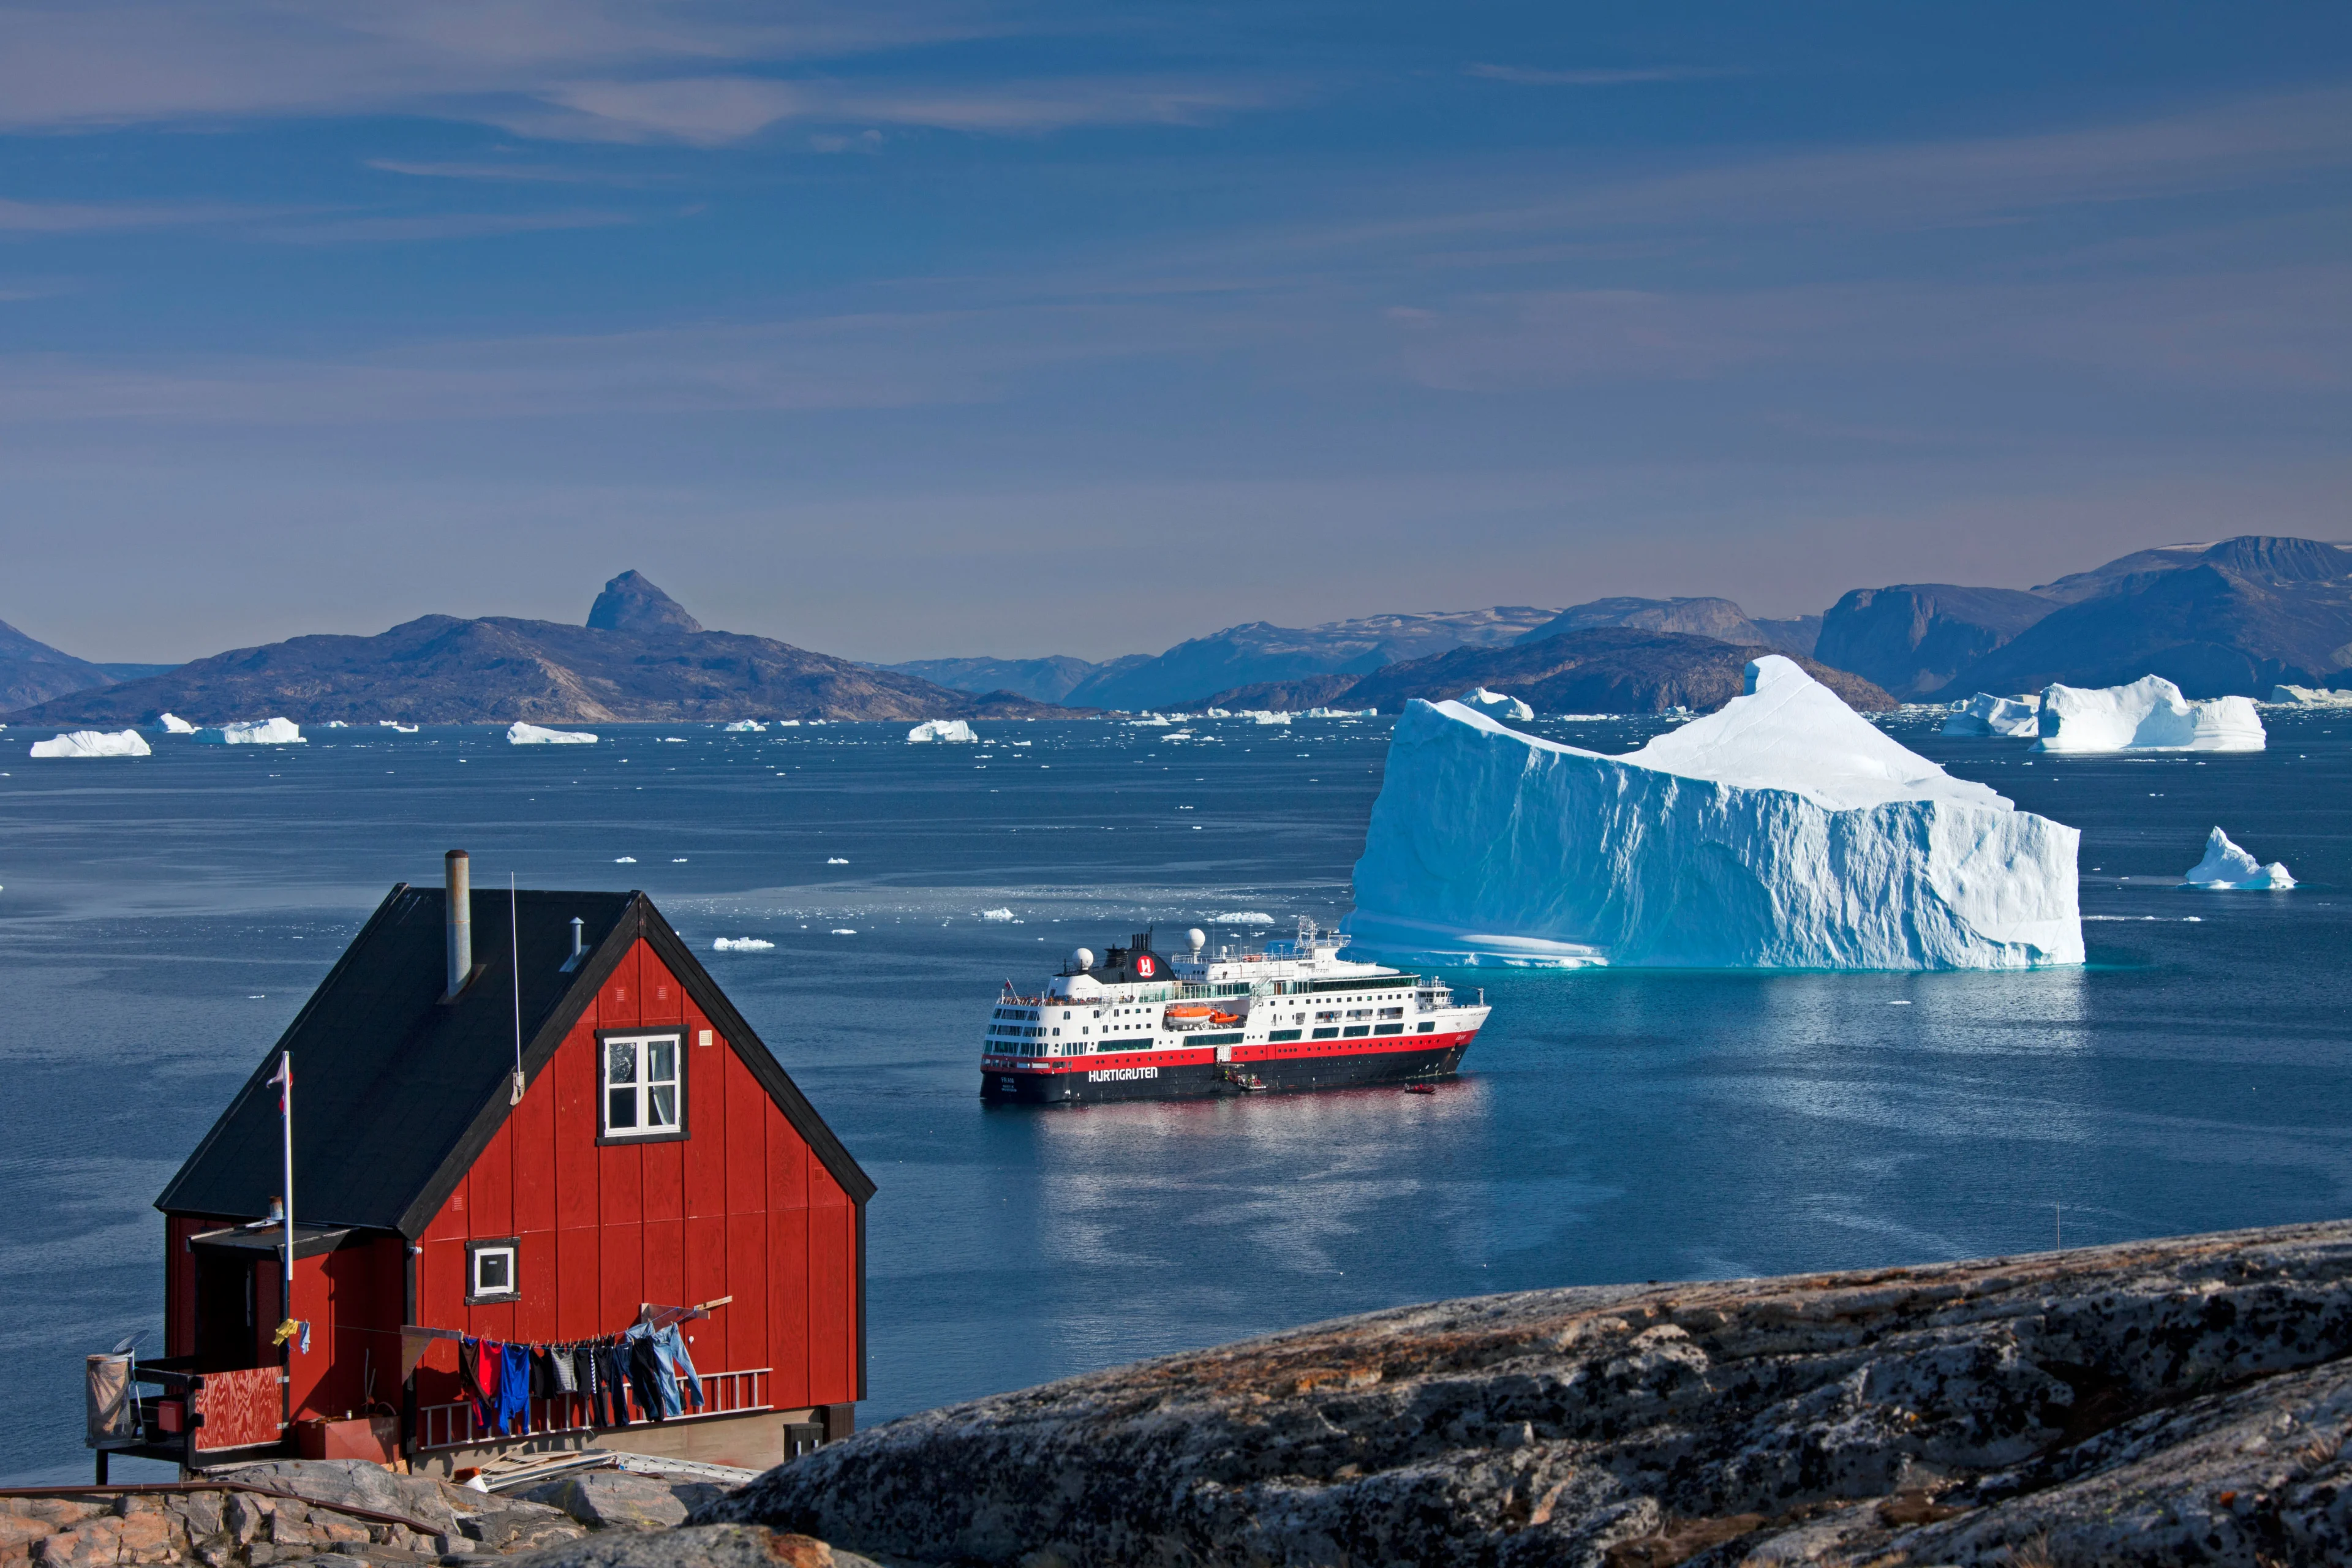 Book an exciting adventure on a Hurtigruten Expedition cruise and save up to 50% off!